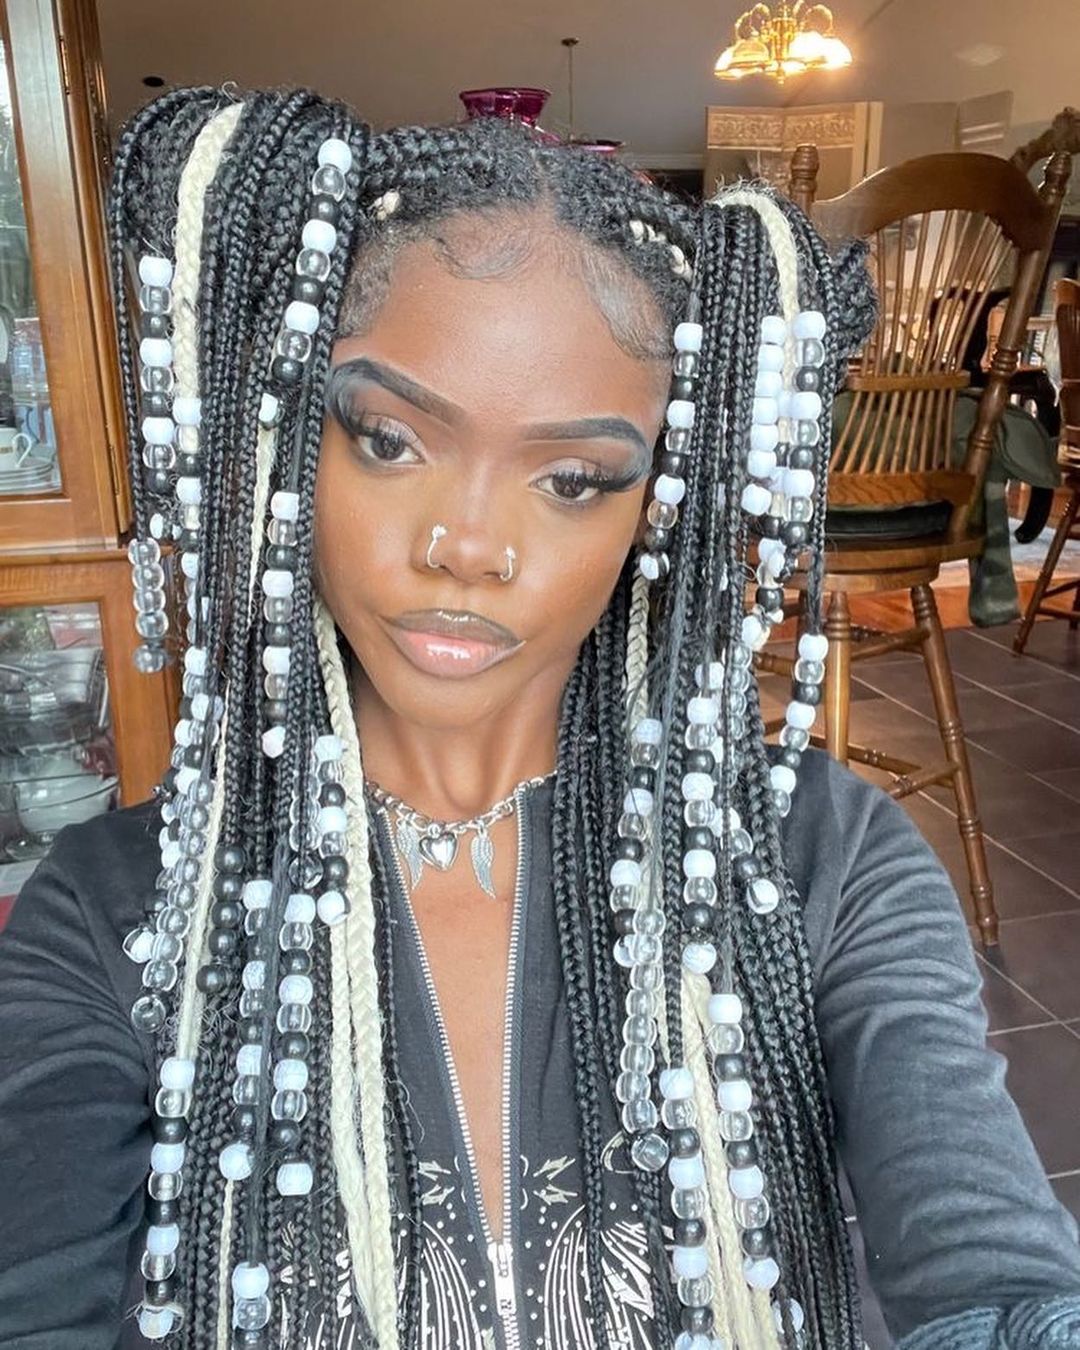 19. Black And Gray Full Double Knot Knotless Braids With Full Beads